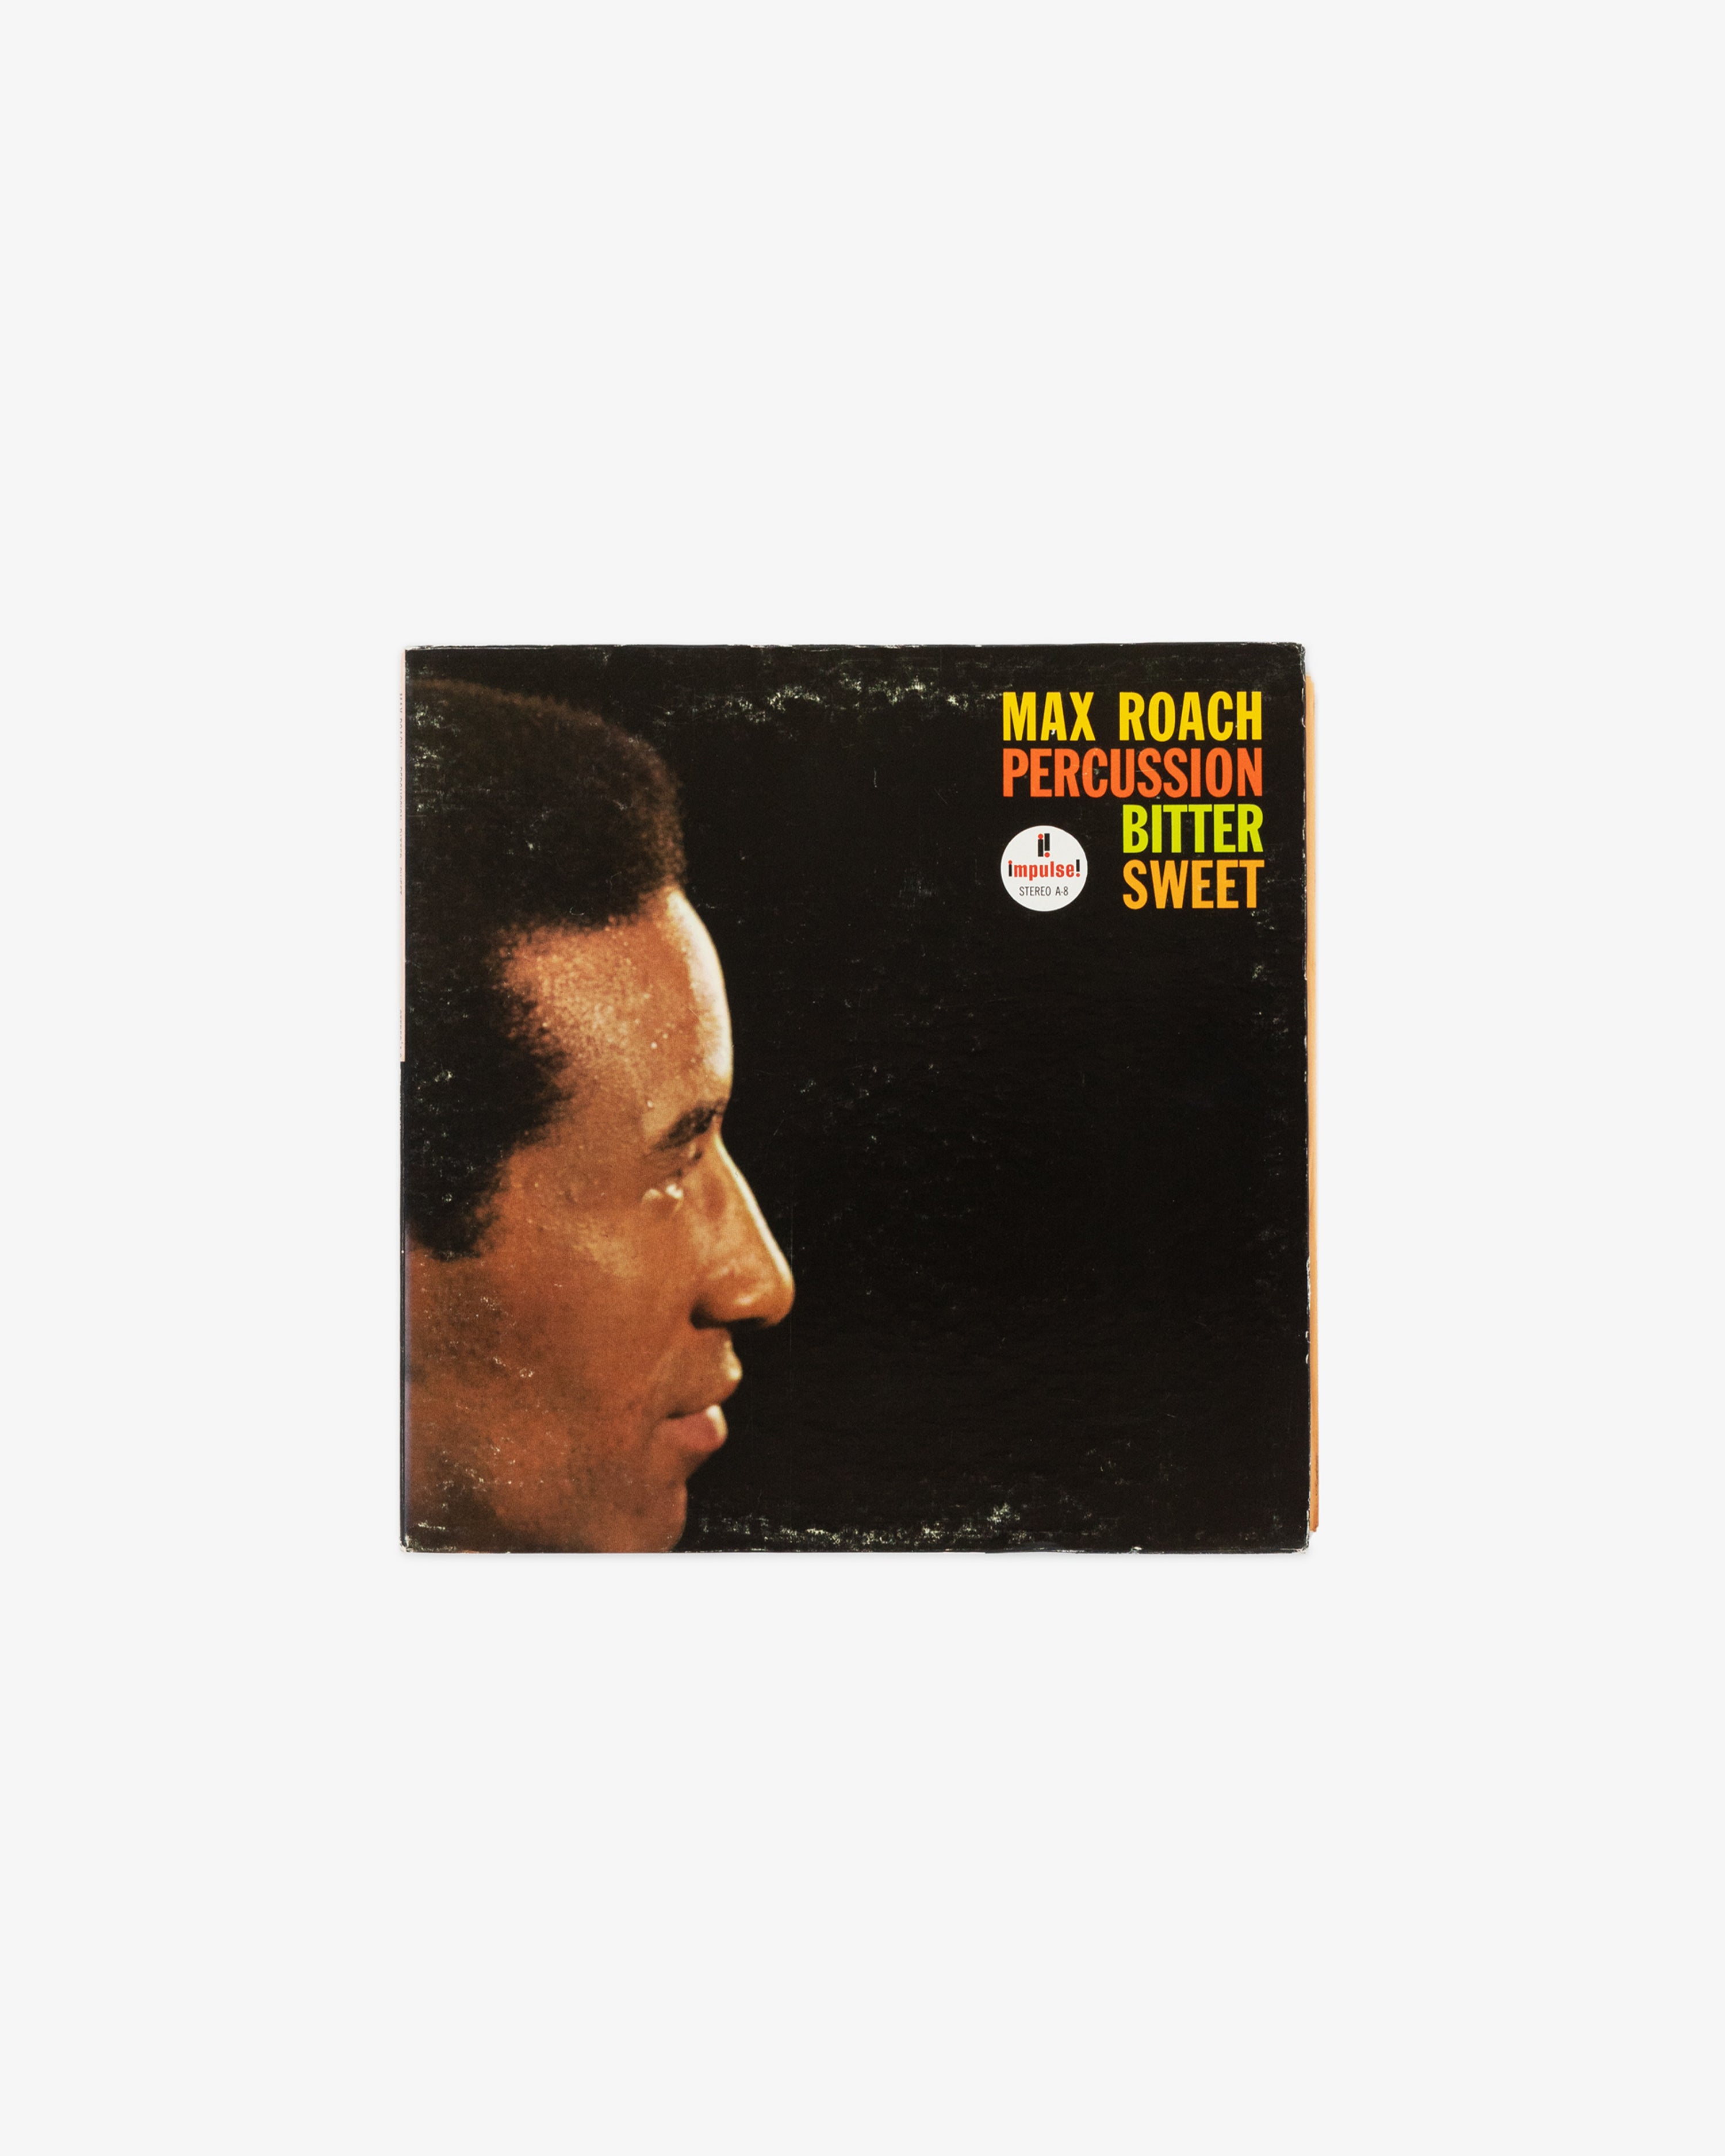 Max Roach – Percussion Bitter Sweet LP